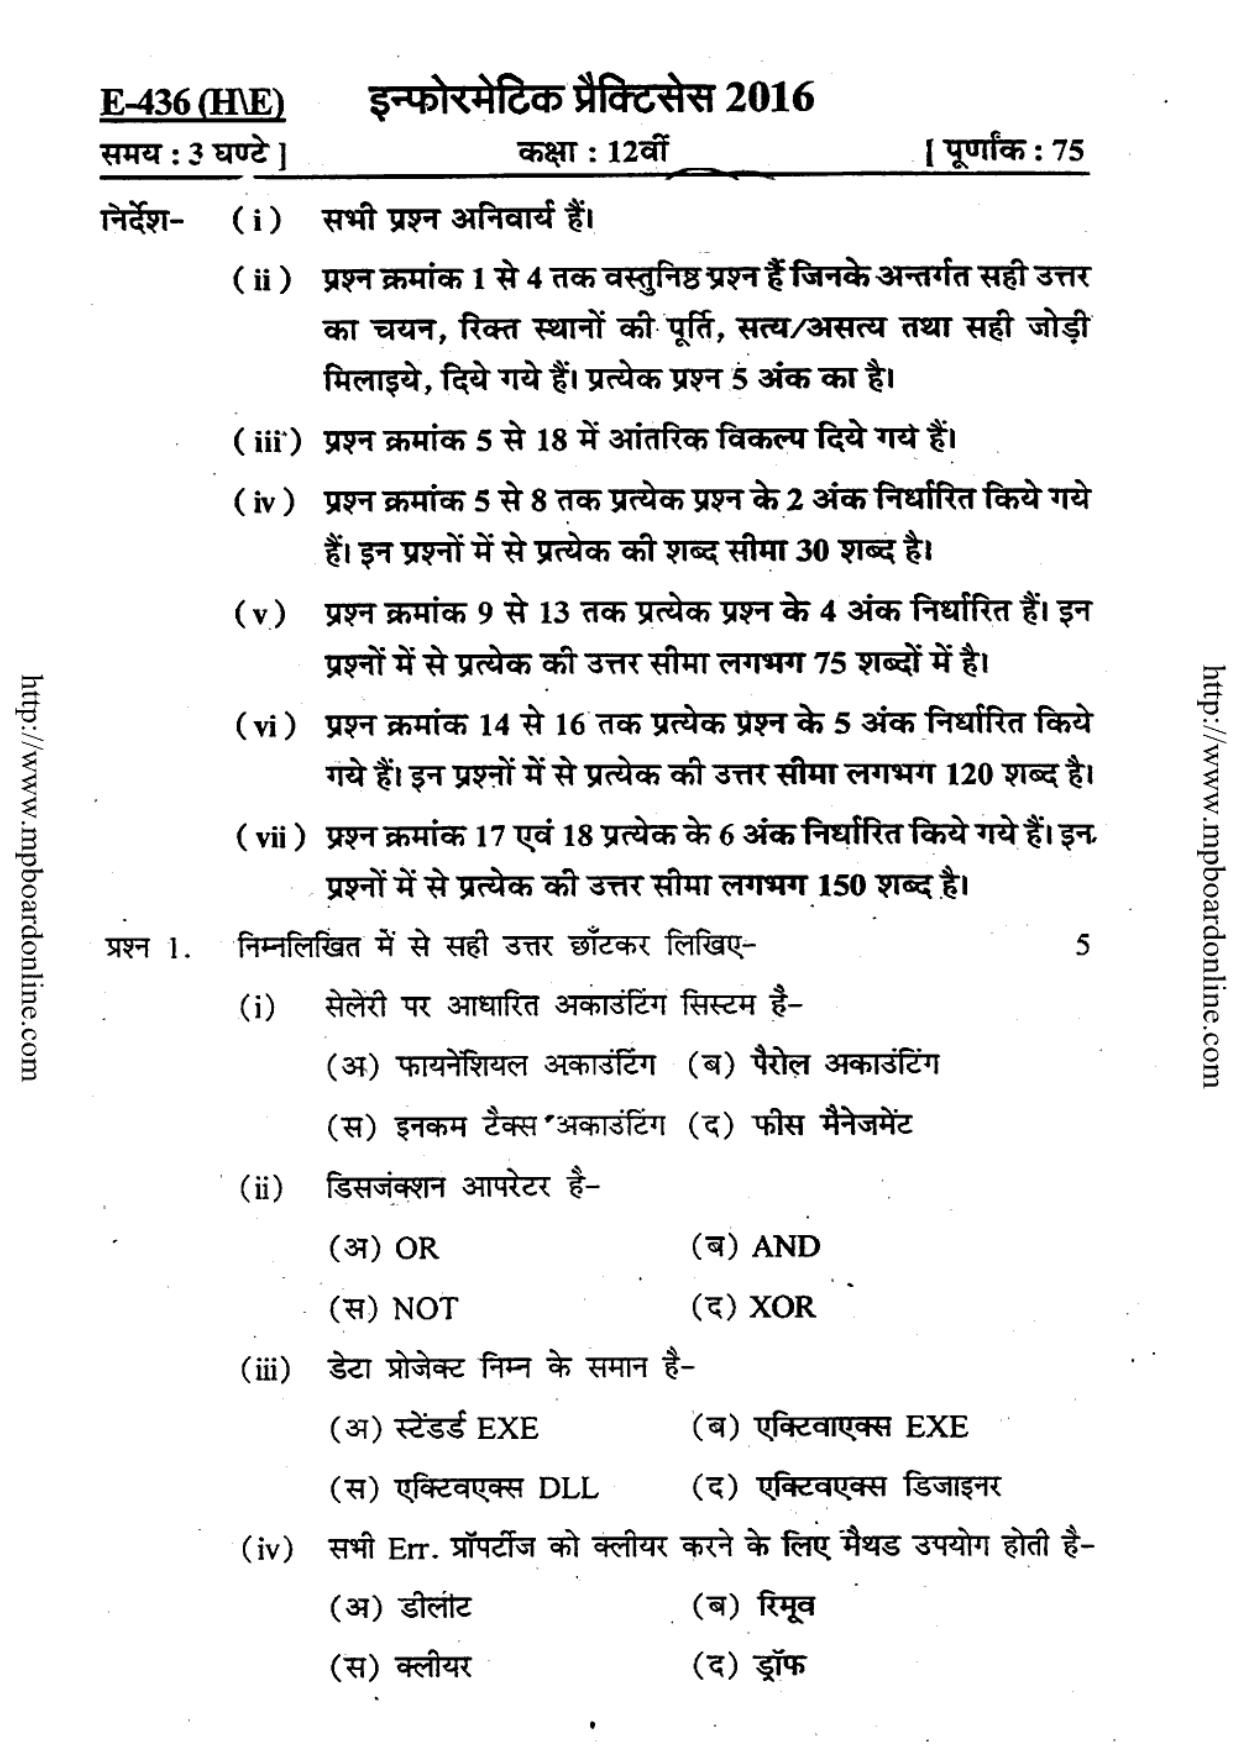 MP Board Class 12 Informatics Practices 2016 Question Paper - Page 1